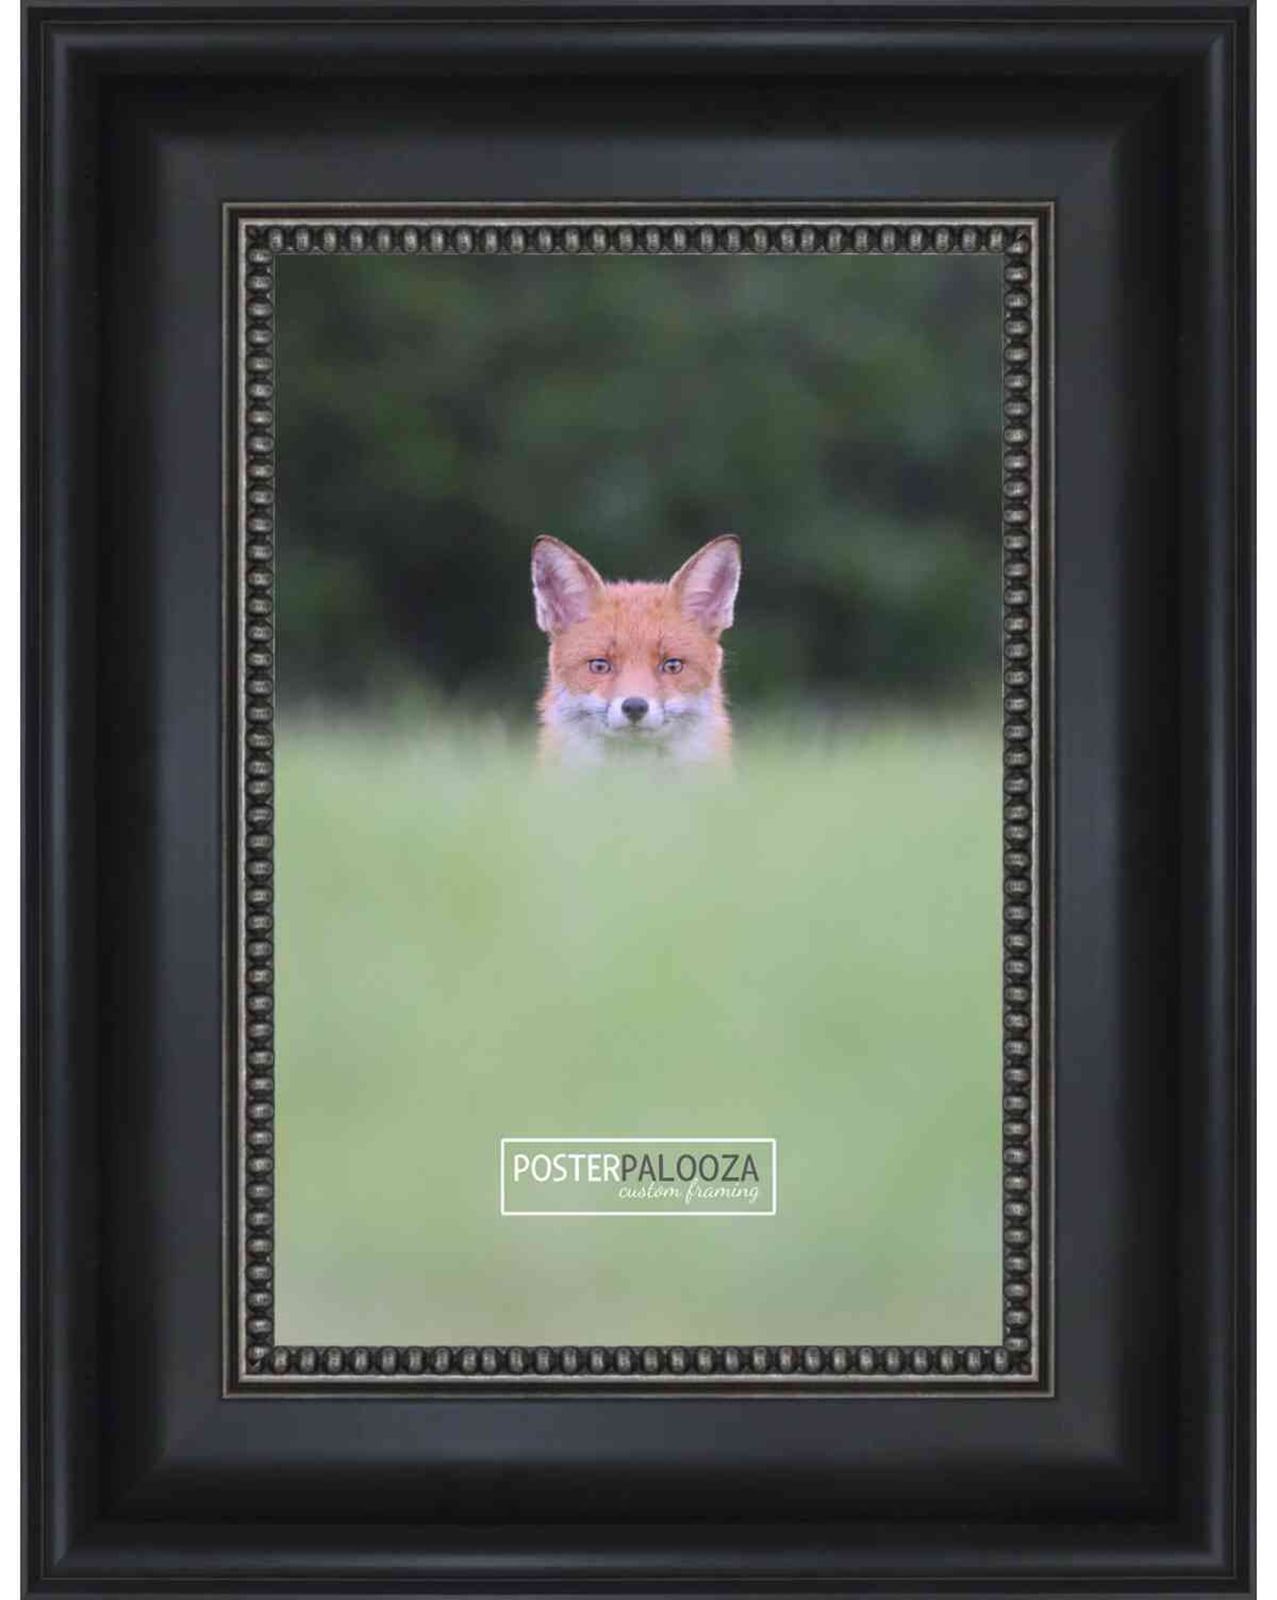 22x25 Black Wood Picture Frame With Acrylic Front and Foam Board Backing 